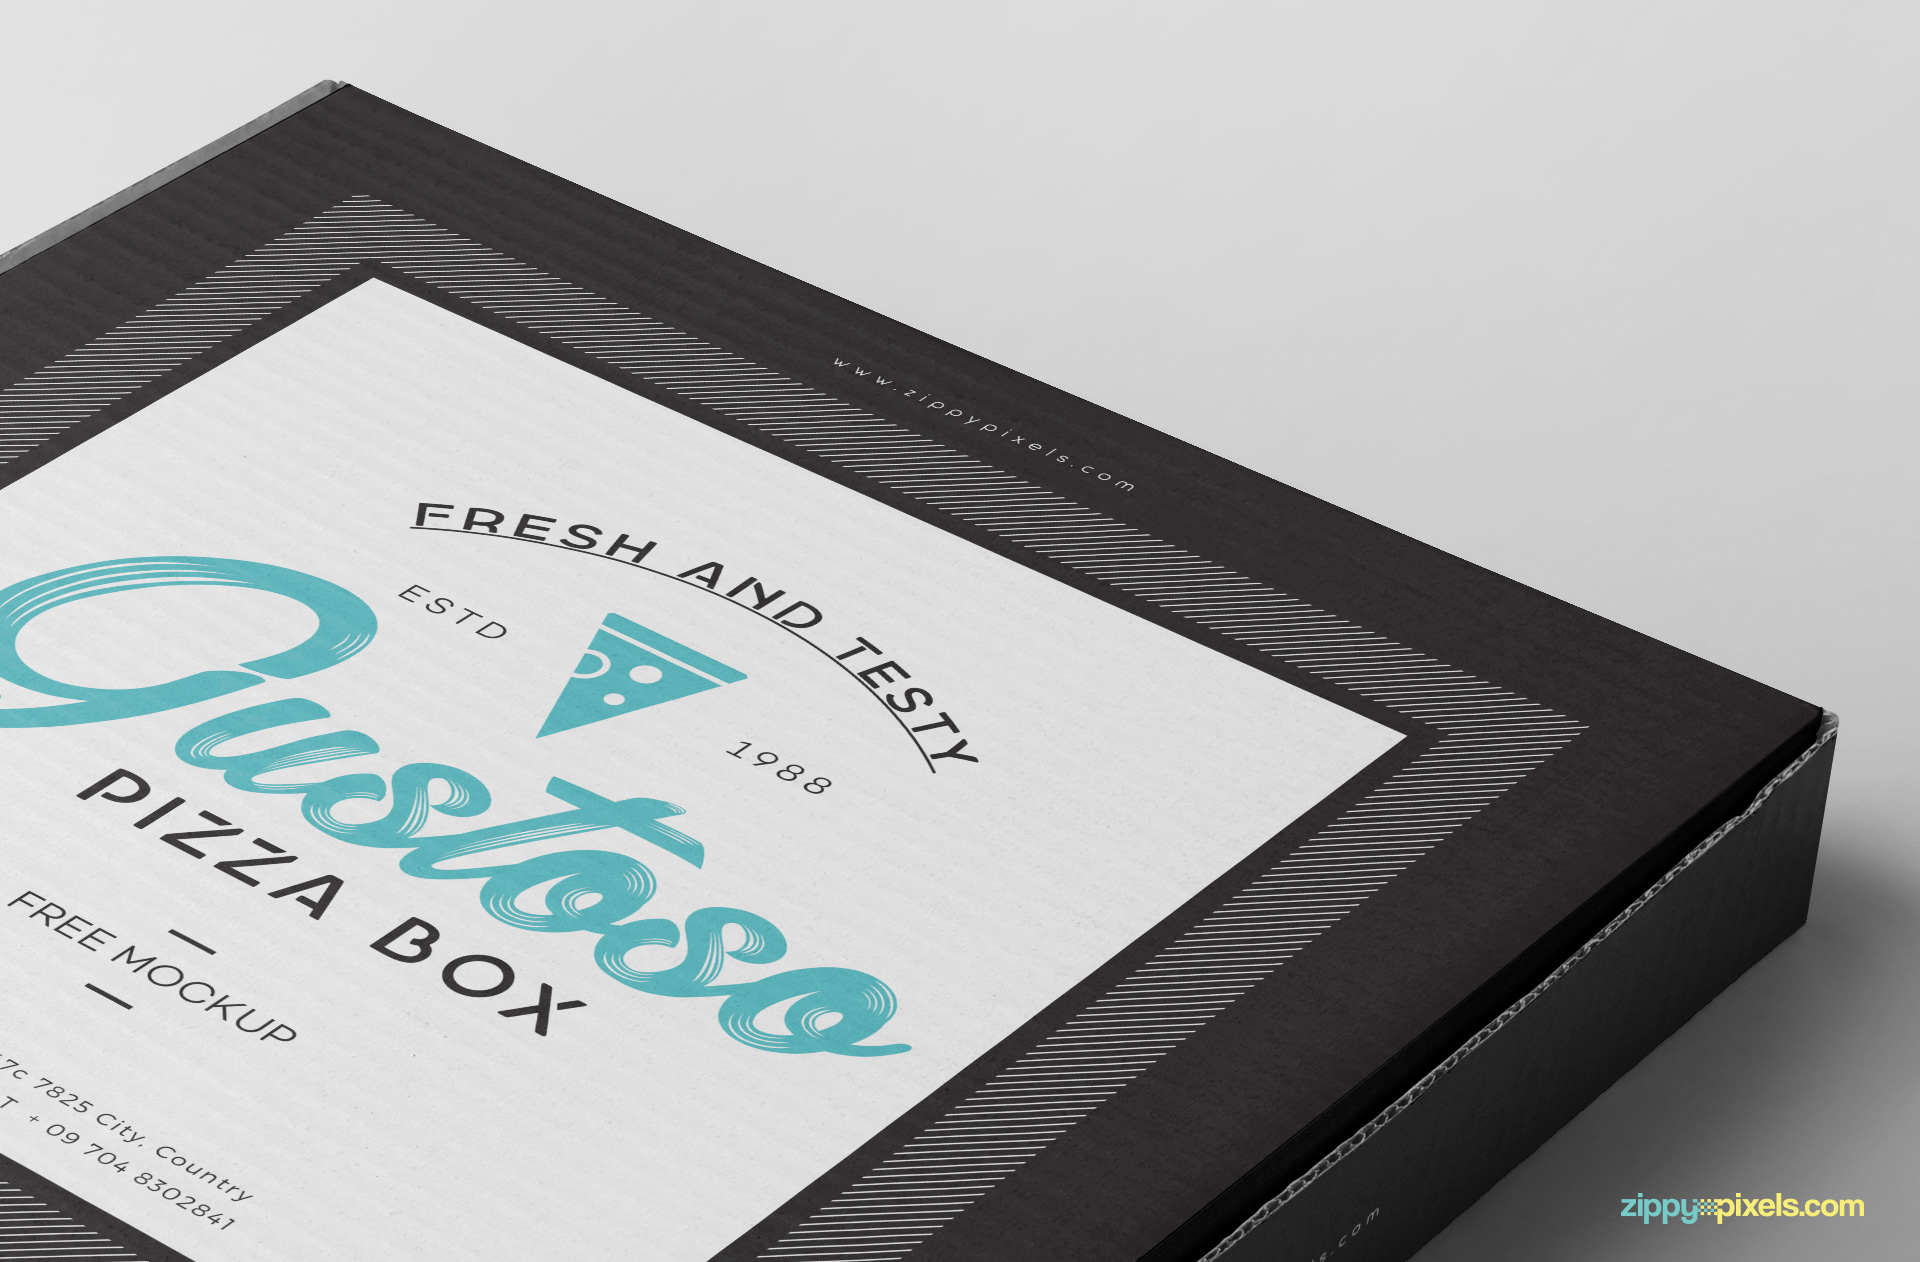 Zoom in view of the pizza box mockup PSD.